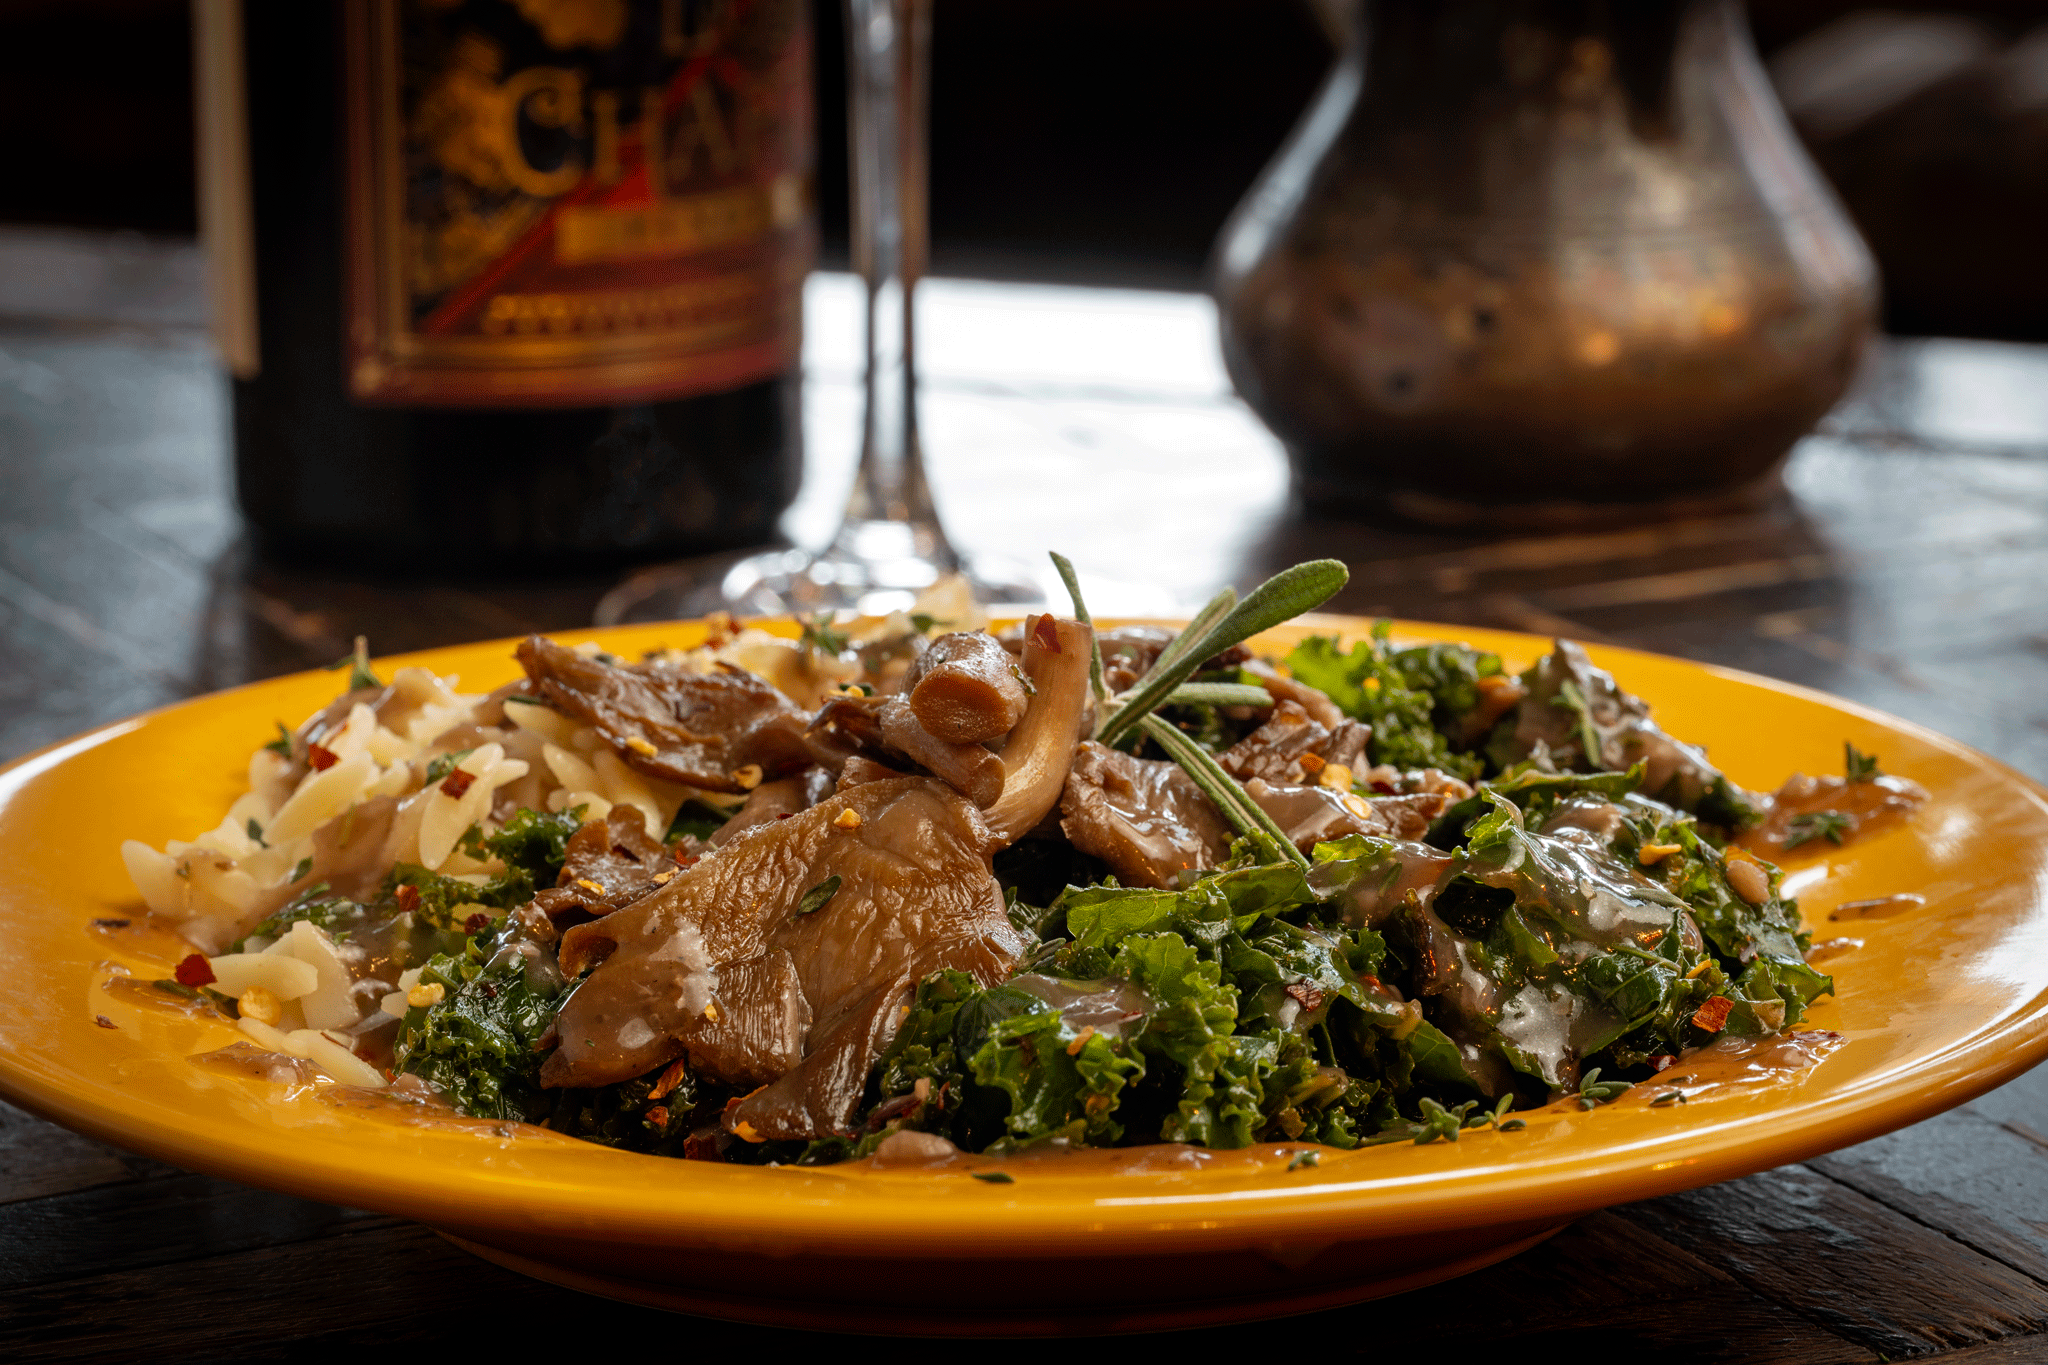 Braised Kale with oyster mushrooms over orzo.